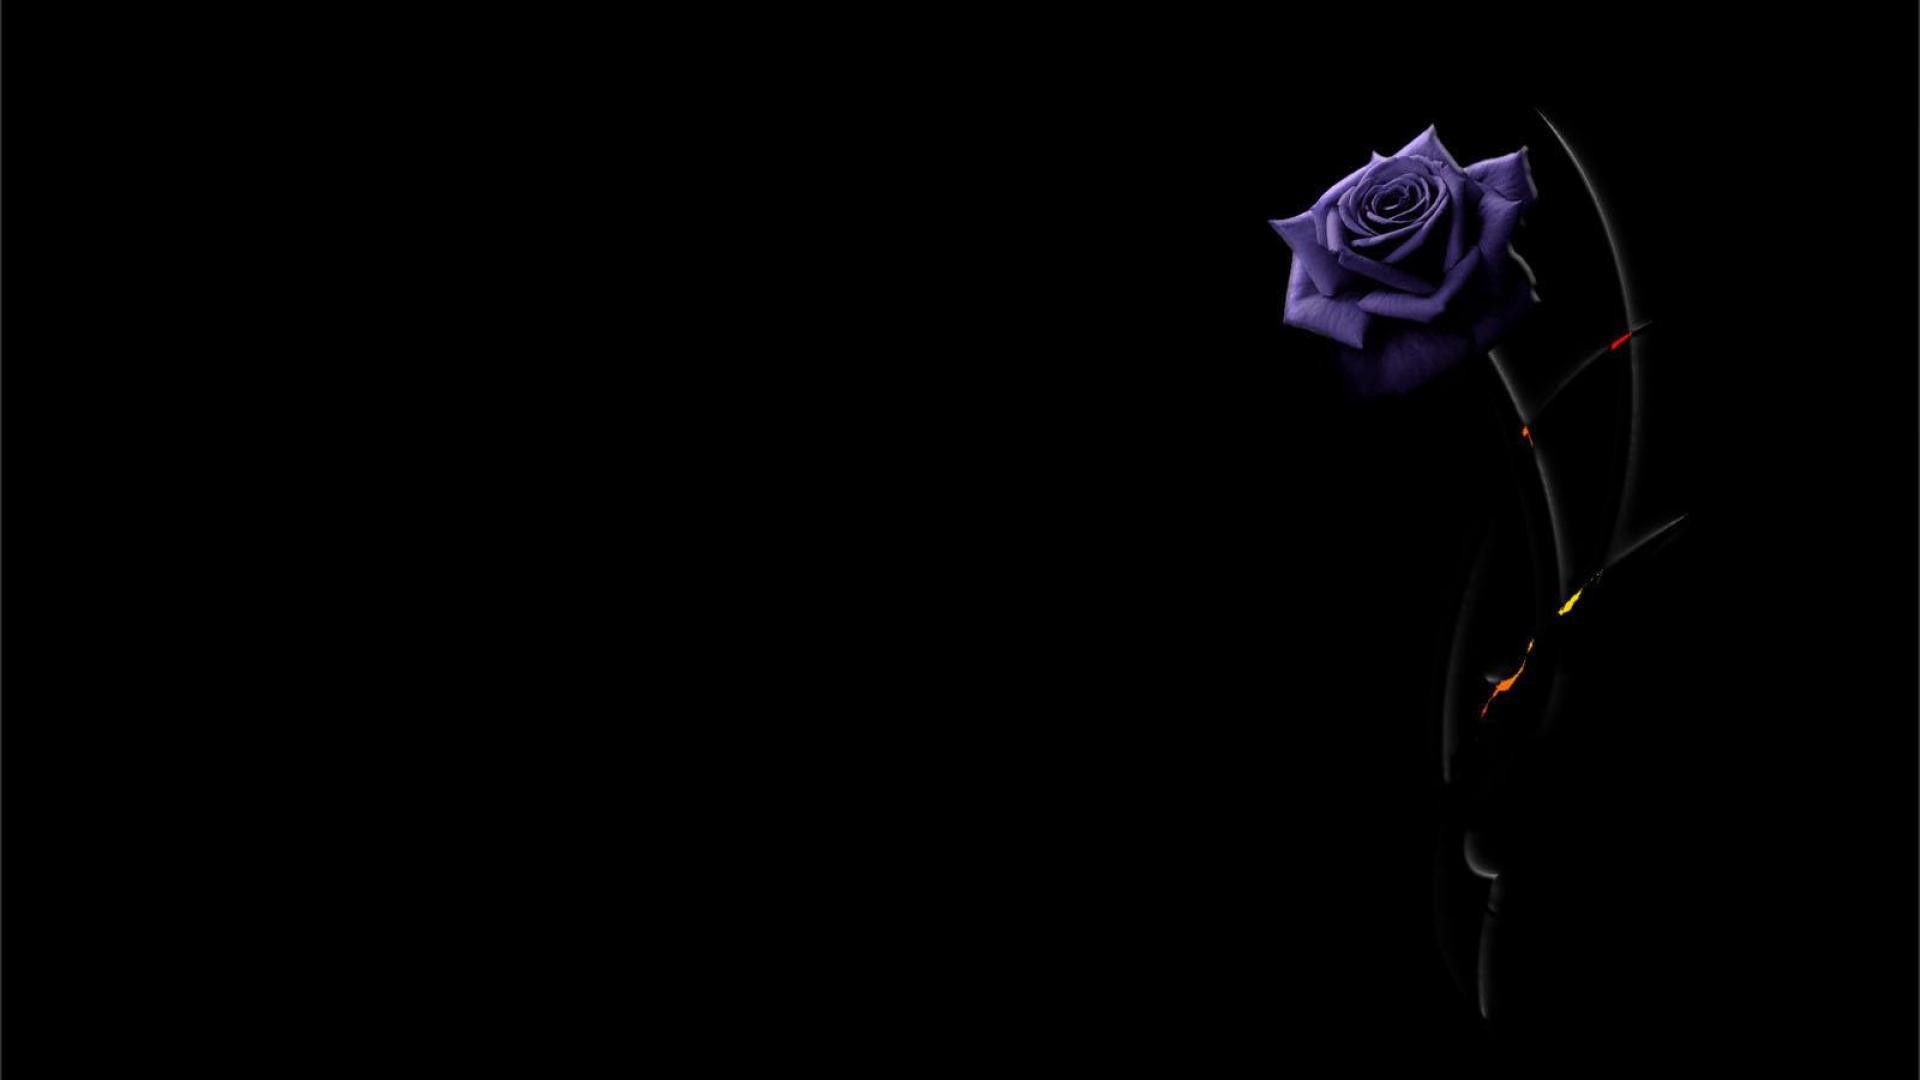 1920x1080 Beautiful purple rose on a black background wallpapers and images .